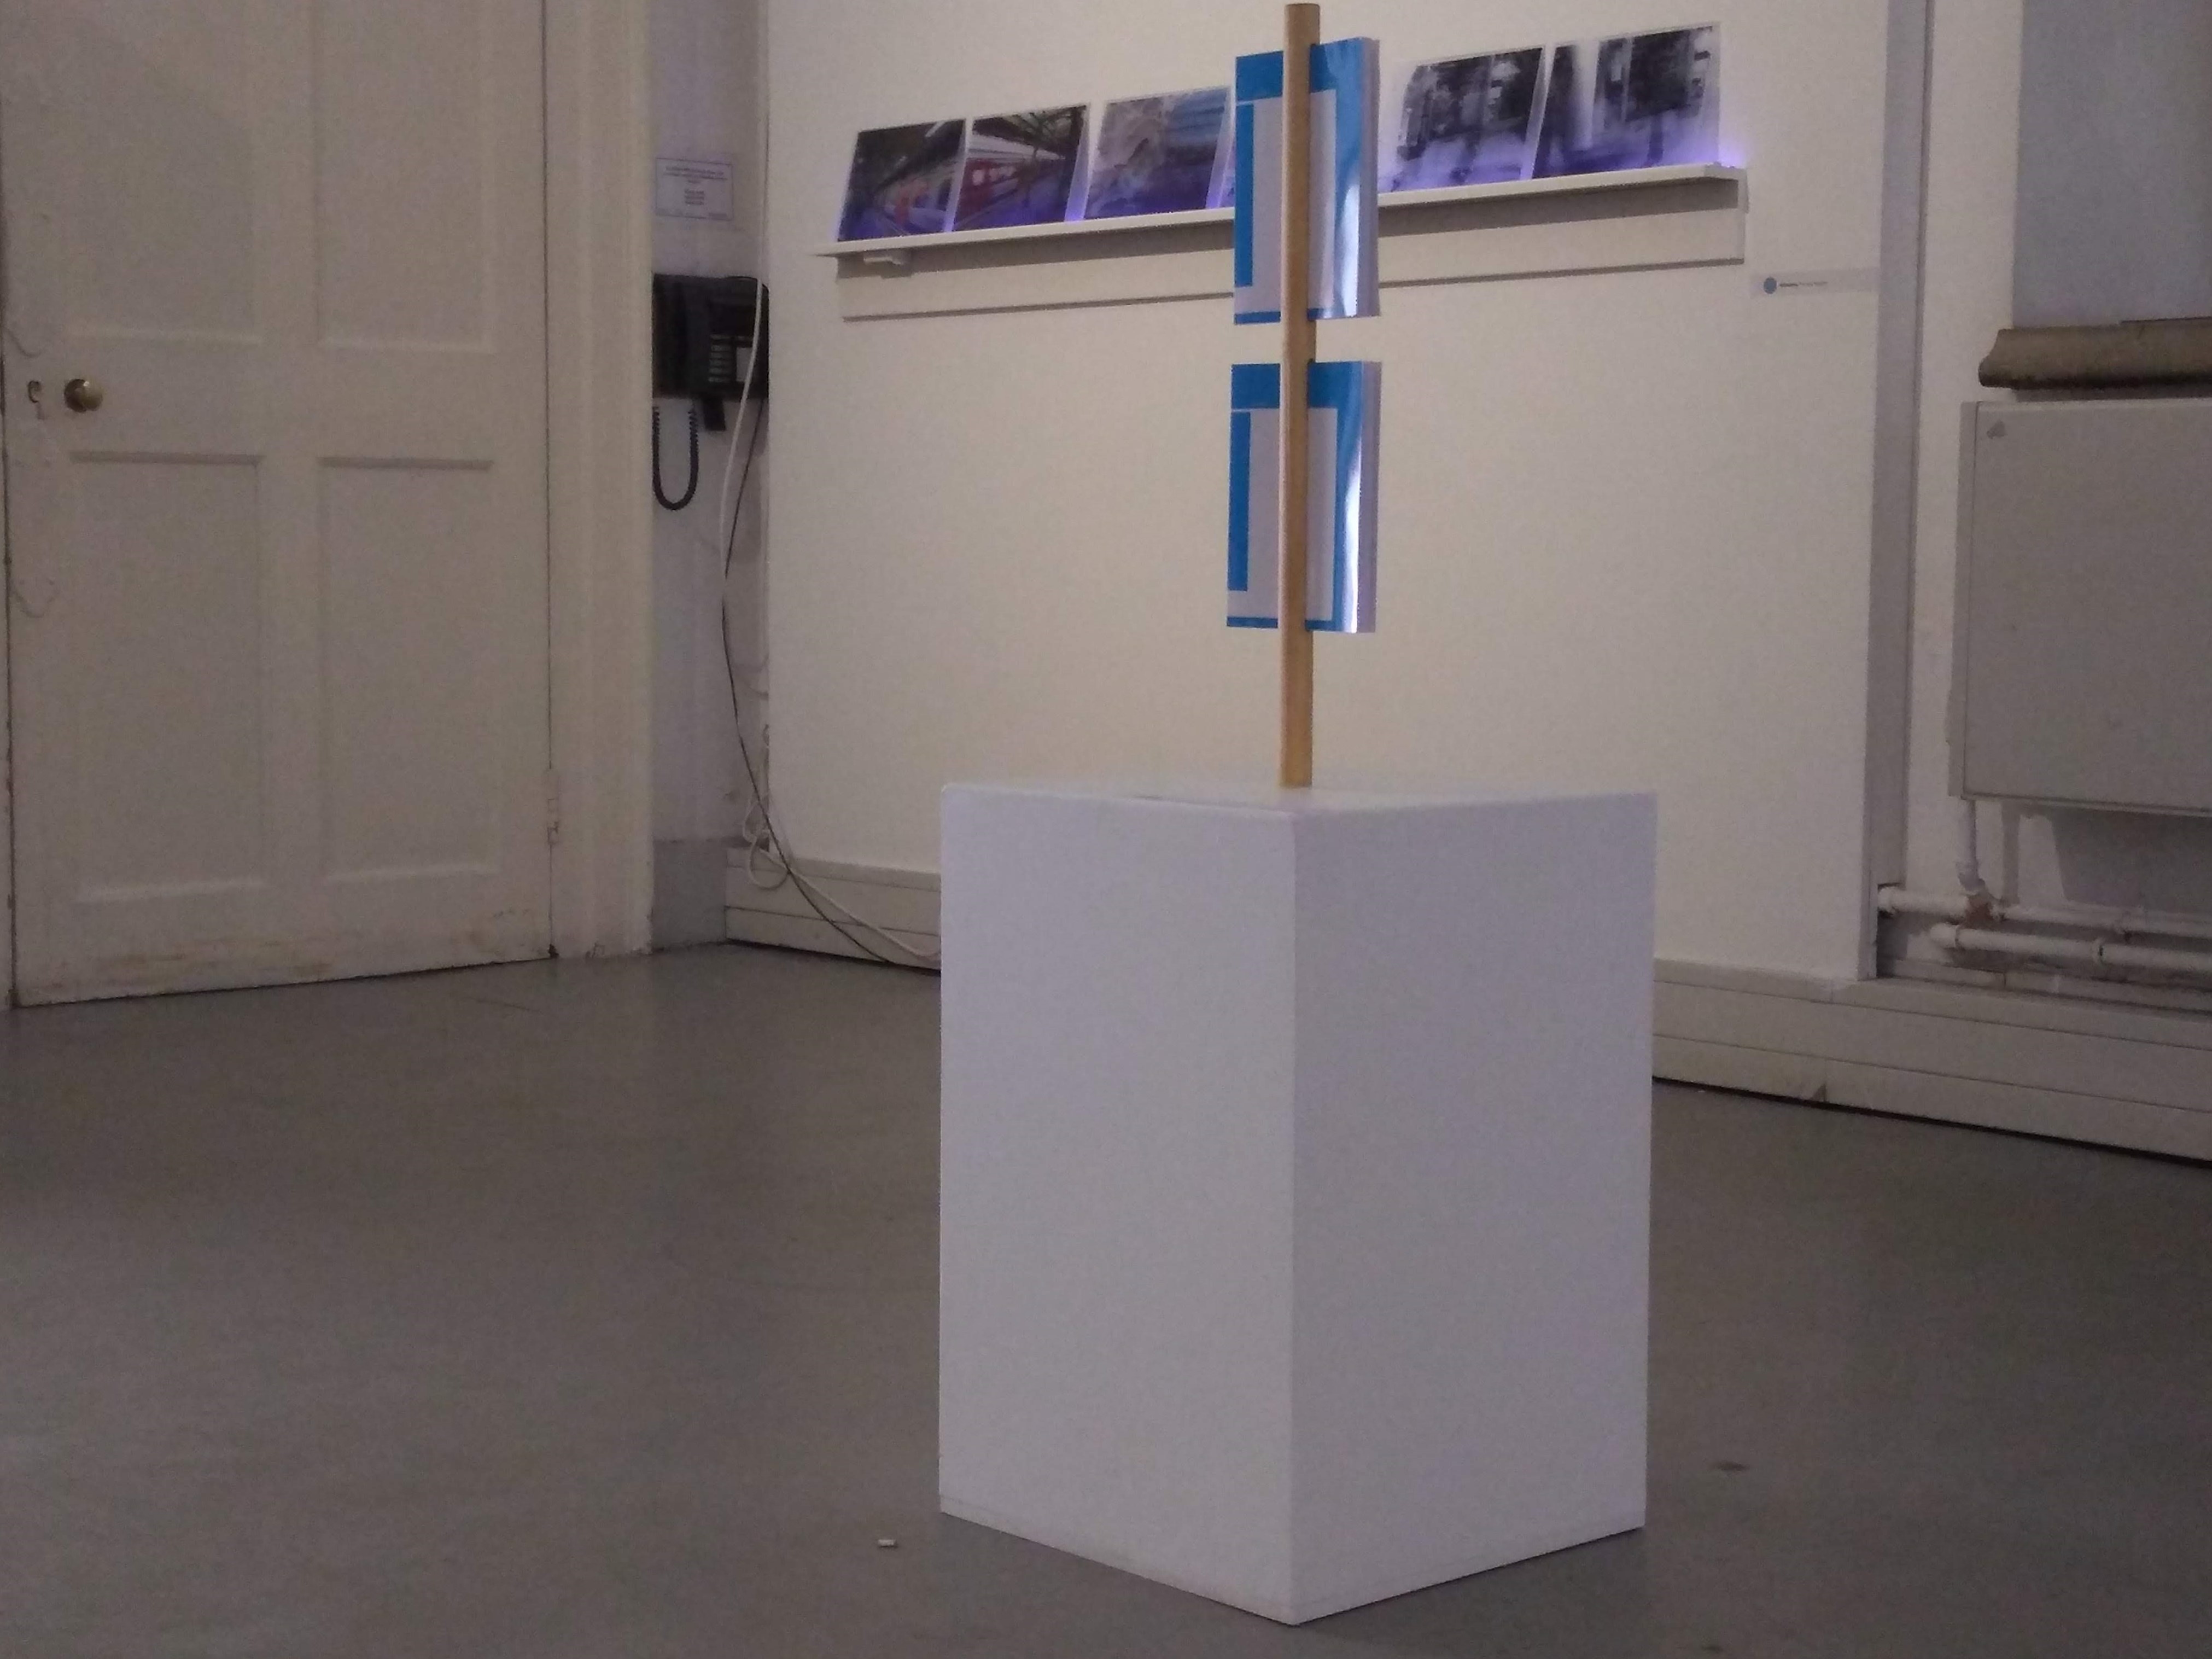 Three Years as installed at the 528 exhibition